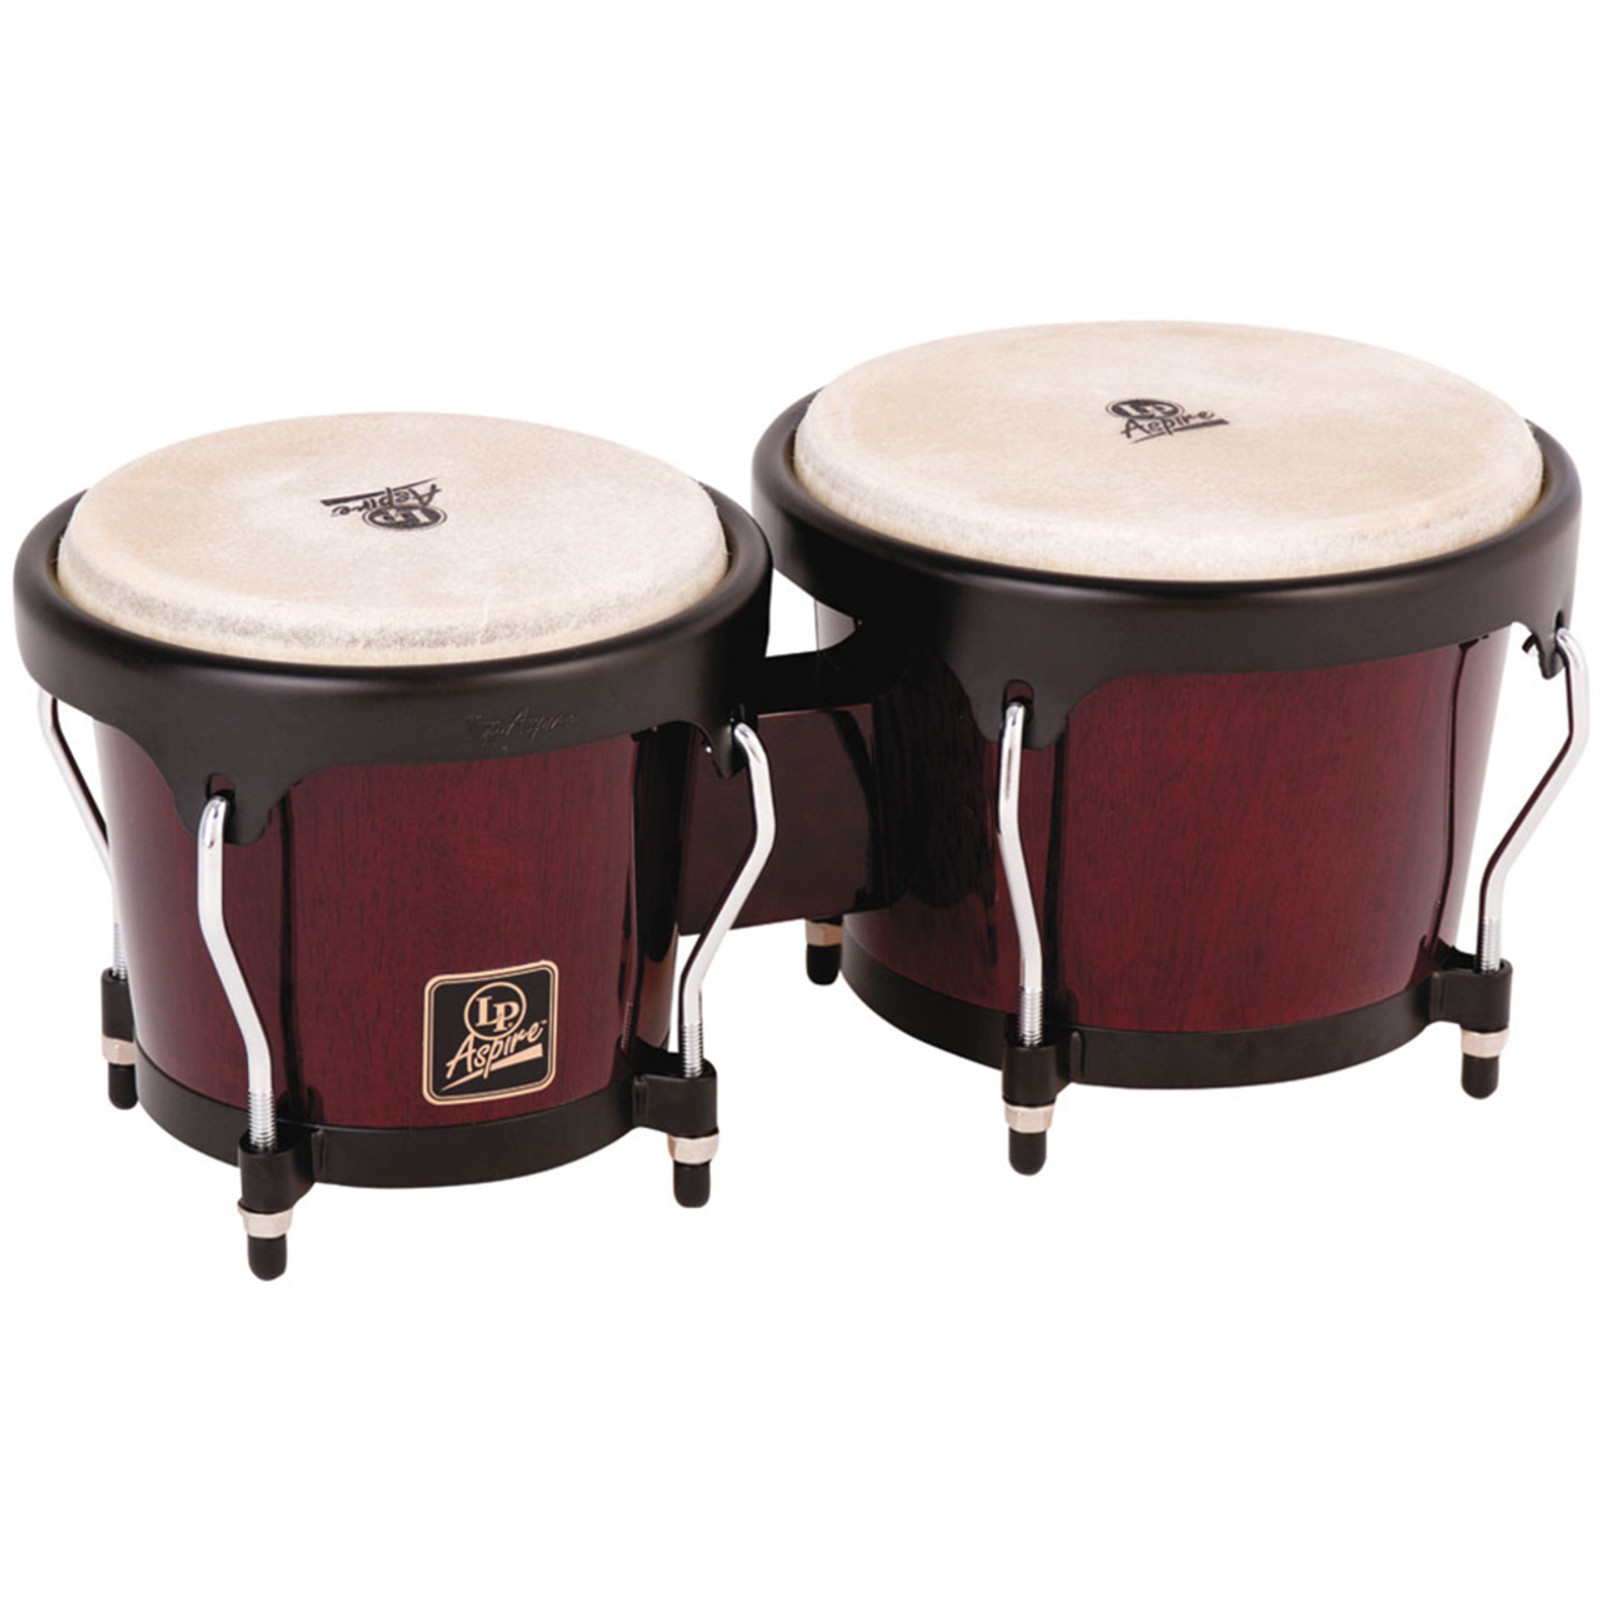 MEINL Percussion マイネル ボンゴスタンド Professional Bongo Stand for Seated Play  パーカッション、打楽器